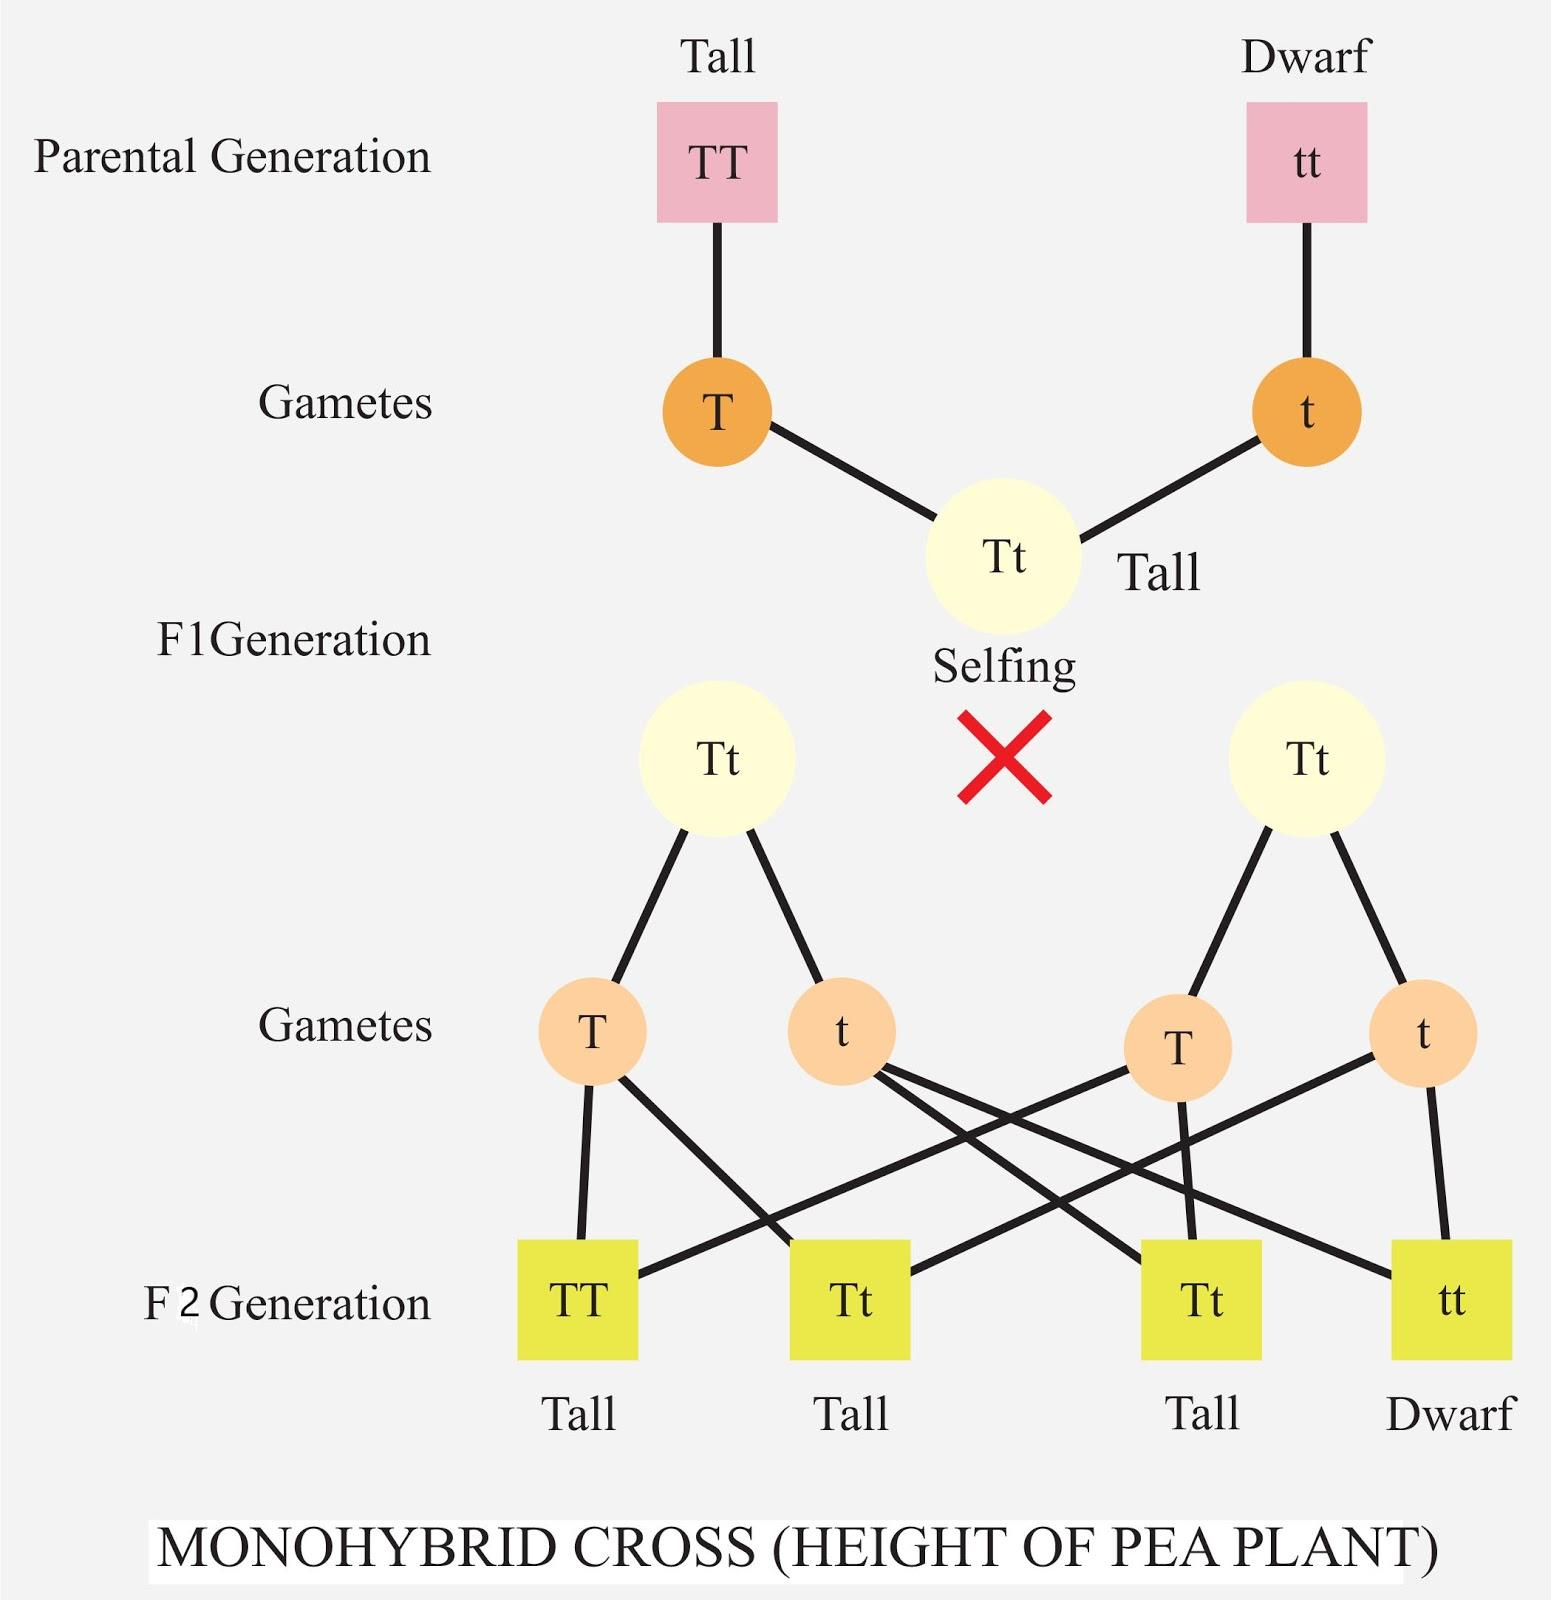 what-is-the-phenotypic-ratio-of-a-monohybrid-cross-a-1-3-b-3-1-c-1